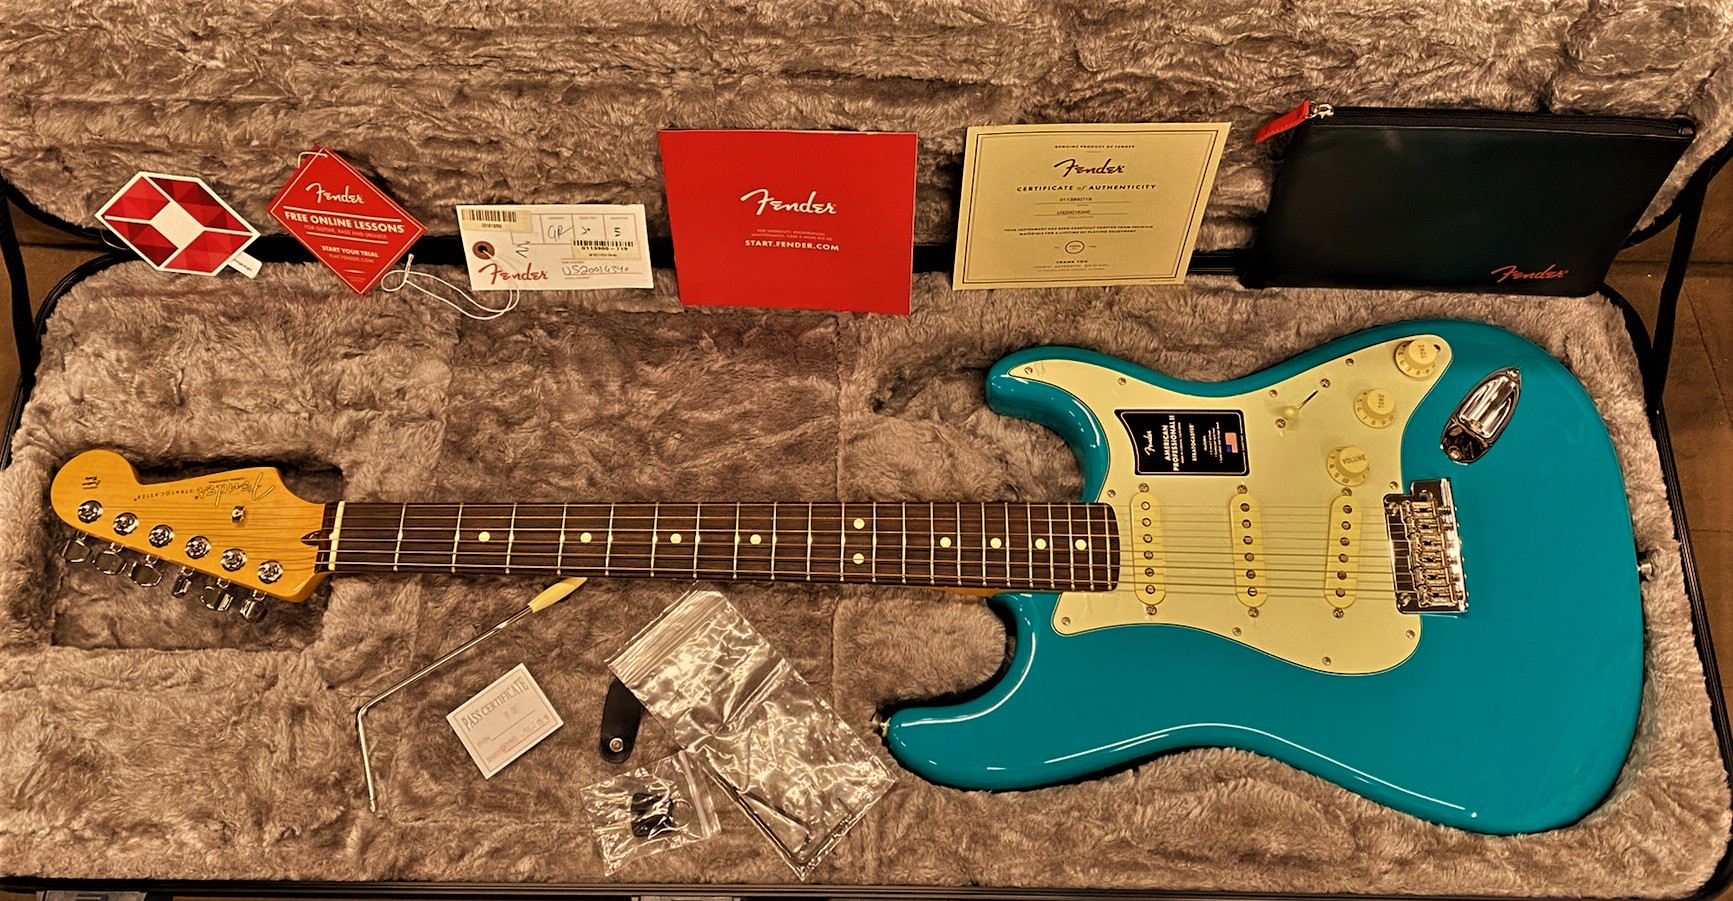 American　Rosewood,　Stratocaster,　【小物プレゼント】　Professional　II　FENDER　Blue　Fender　Miami